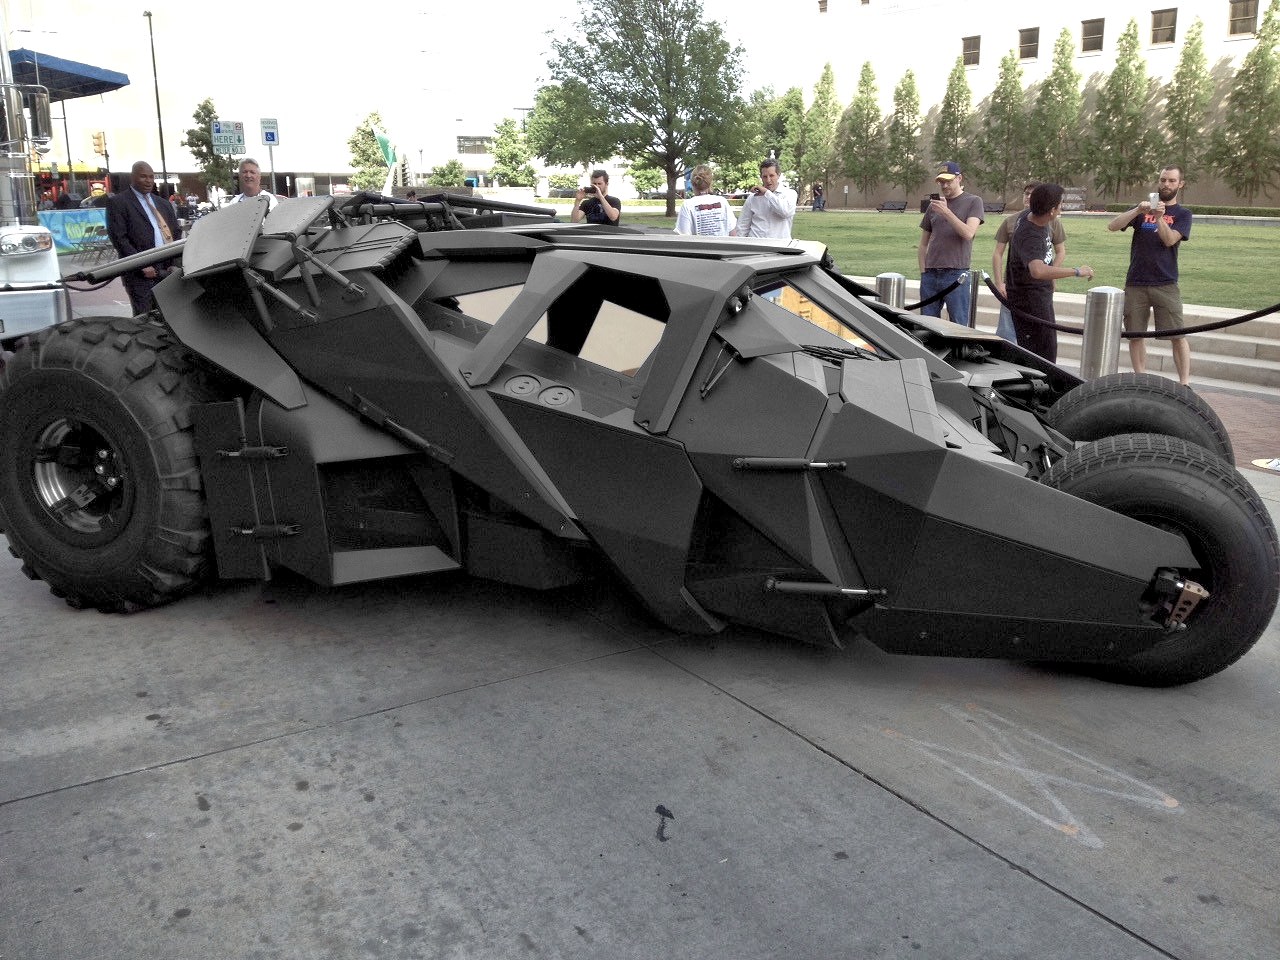 Replica of the Batman Movie Tumbler from the Dark Knight Trilogy